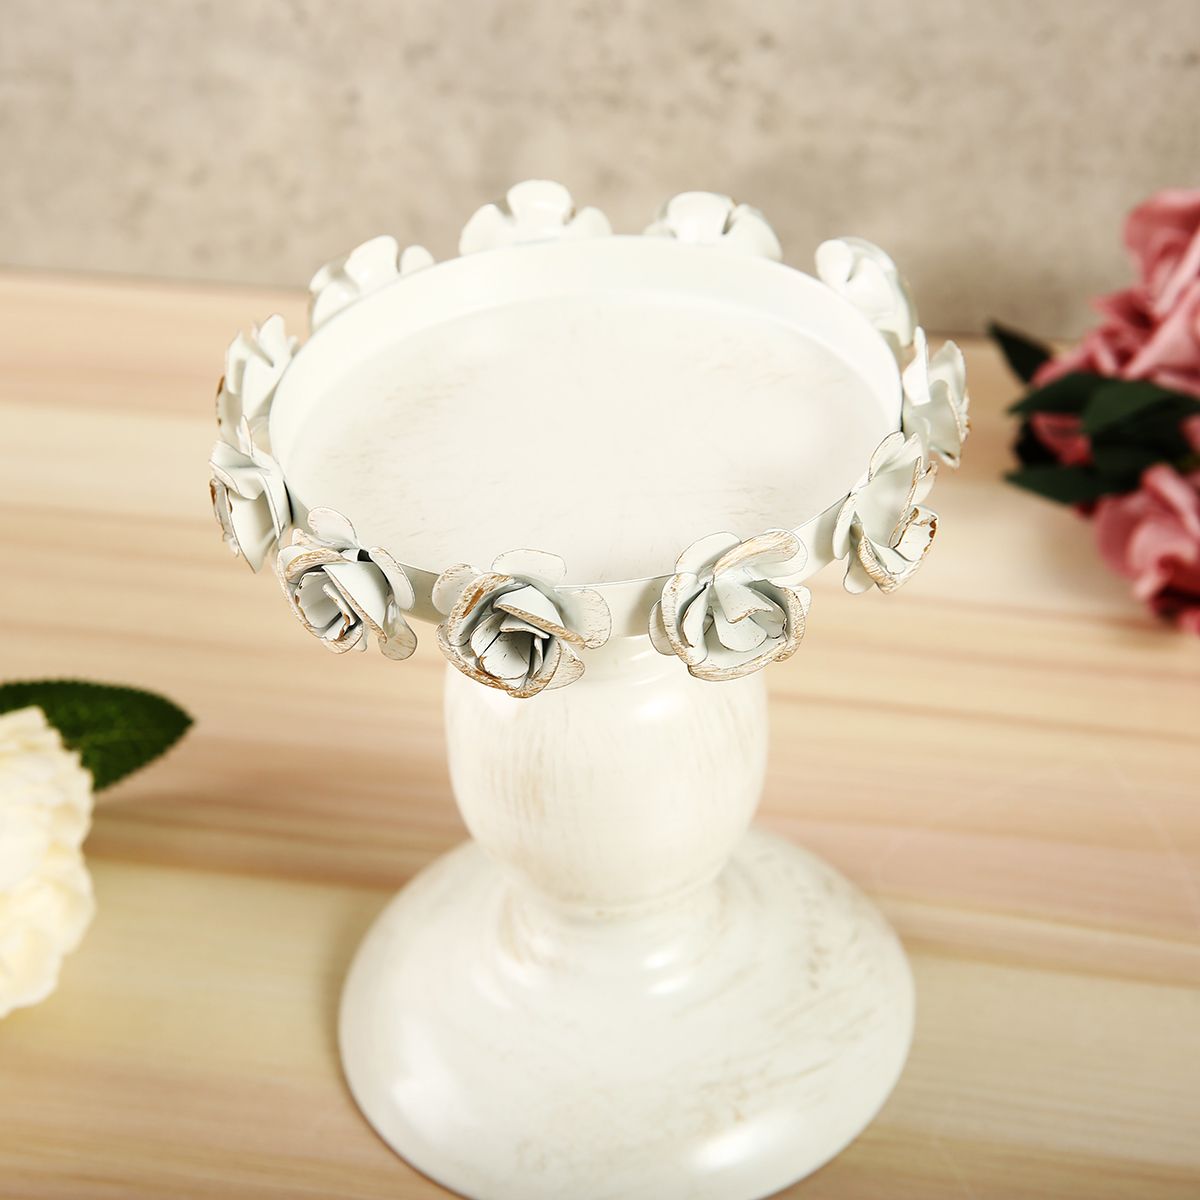 Nordic-White-Metal-Candle-Holder-Glass-Head-Iron-Candlestick-Home-Wedding-Decor-1579869